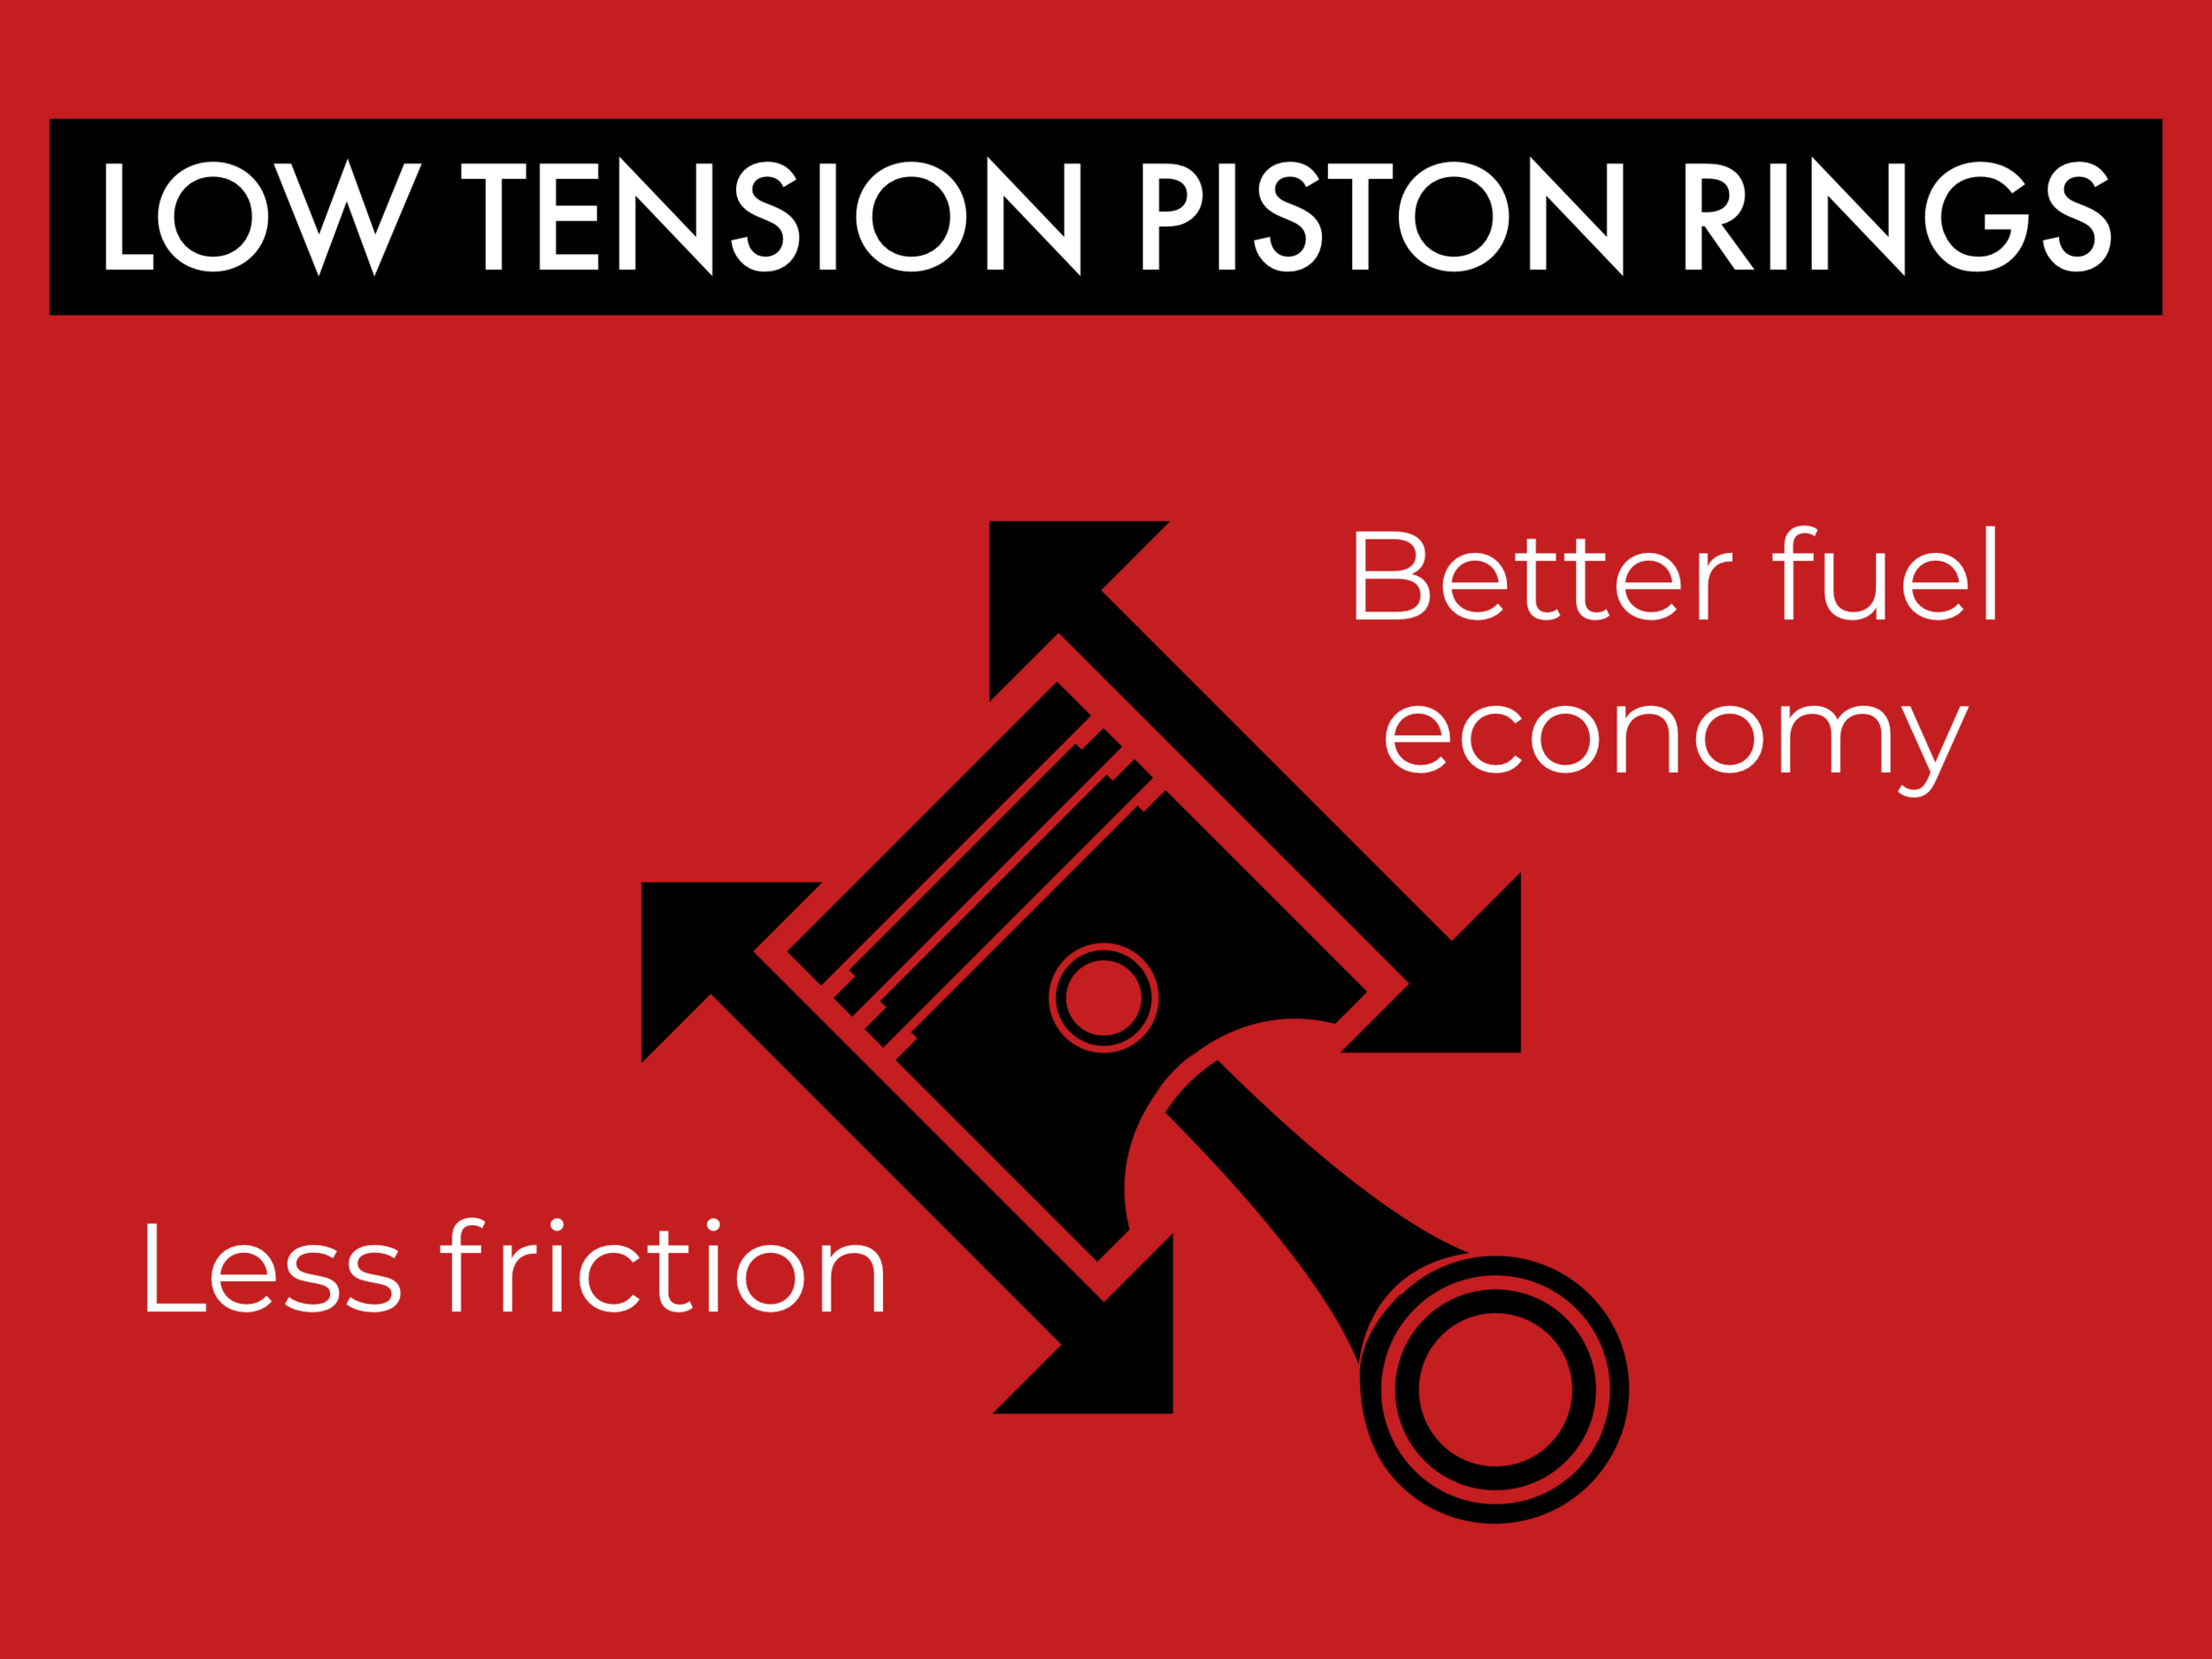 All modern engines use low tension piston rings.